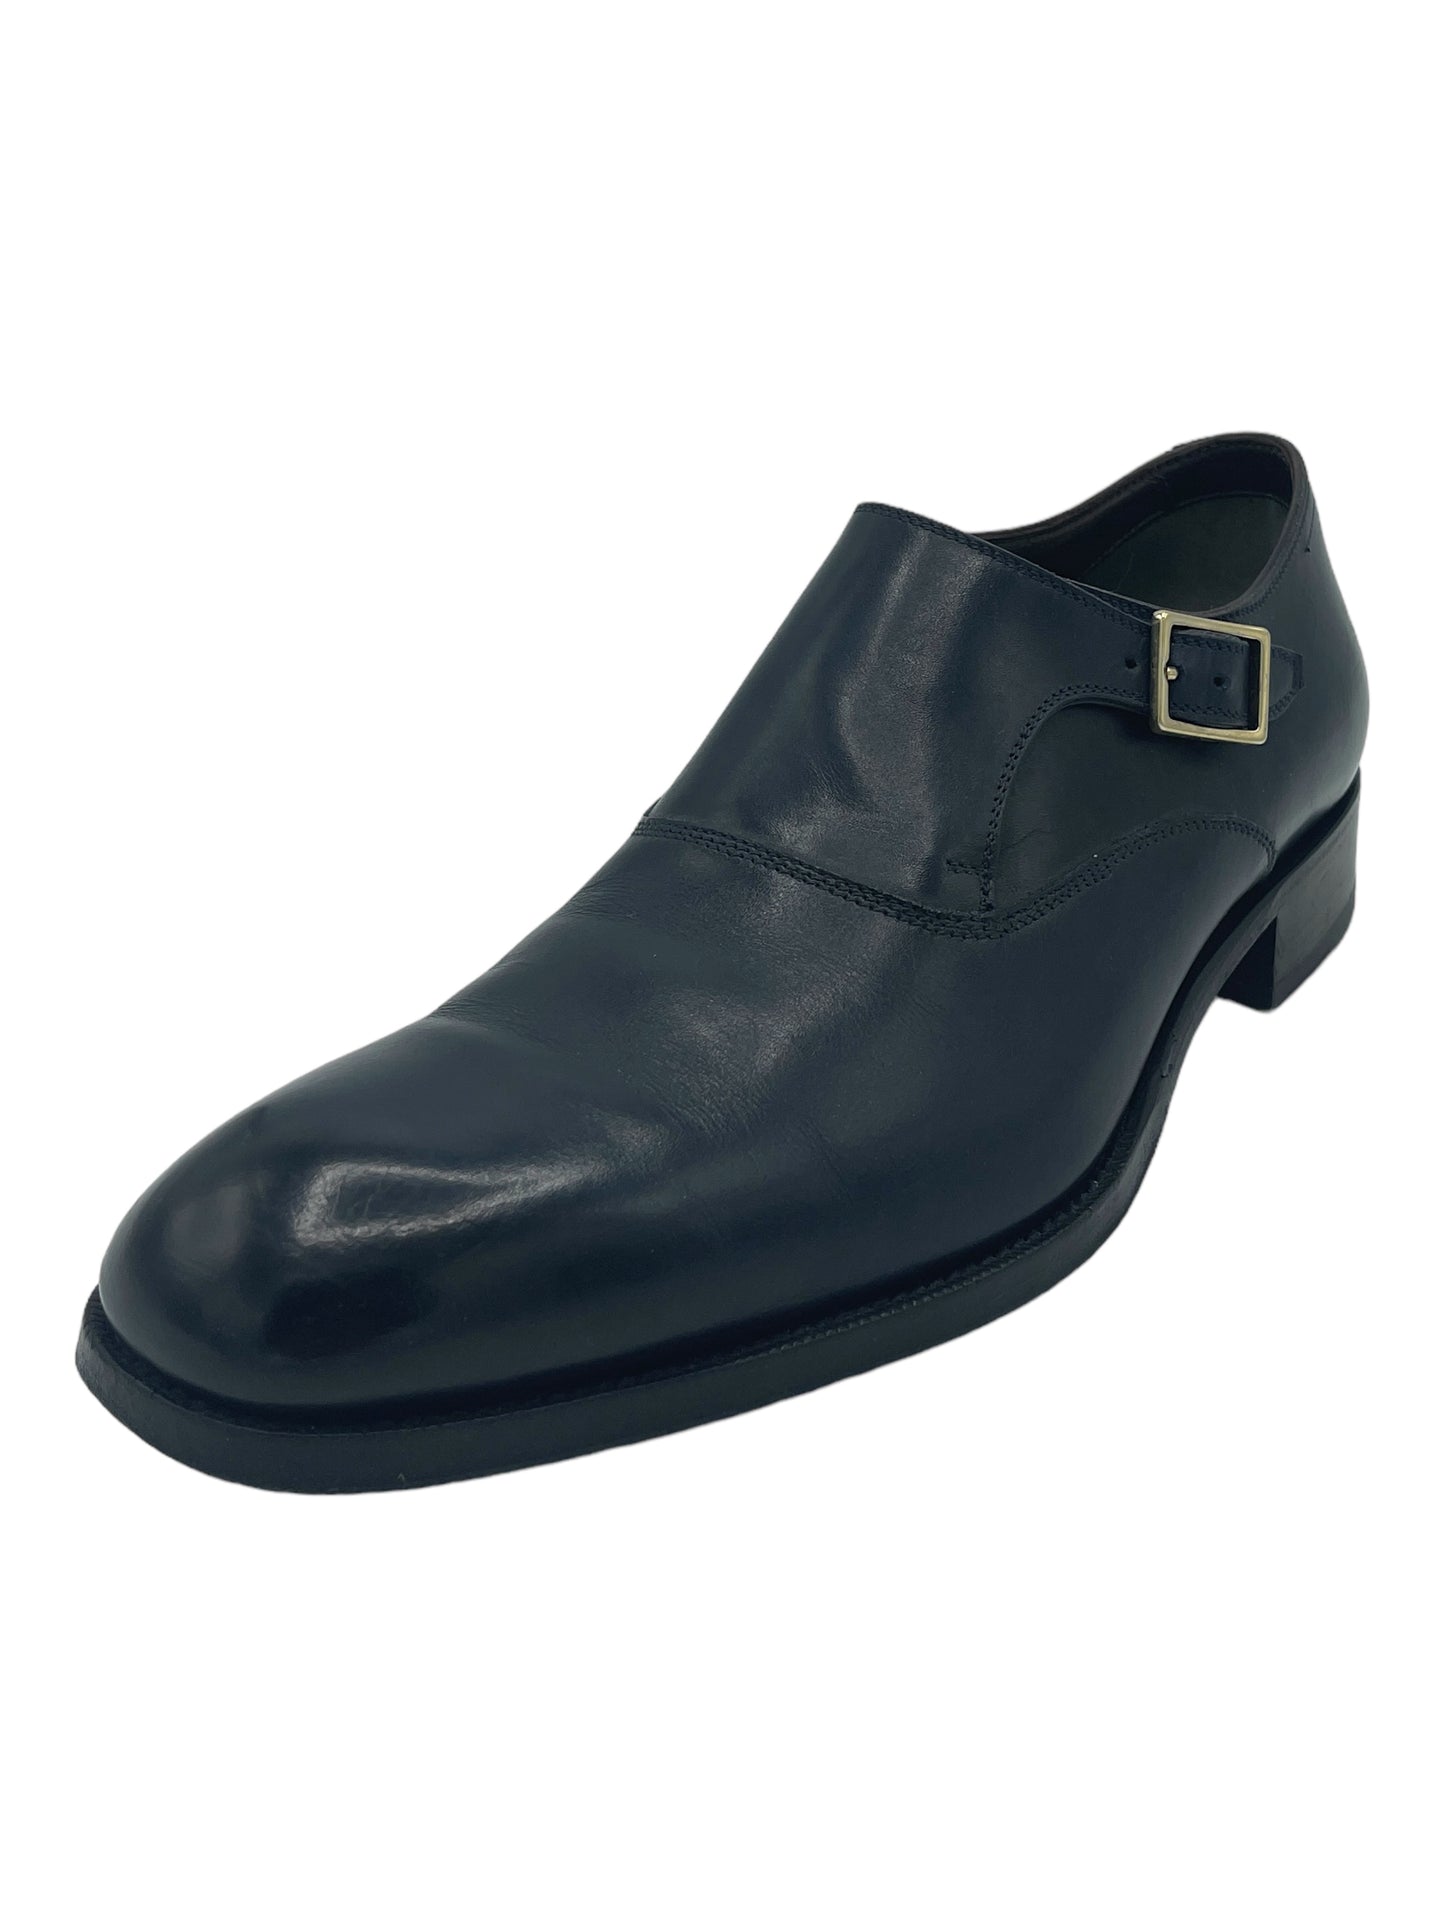 Tom Ford Blue Leather Single Monk Strap Dress Shoes